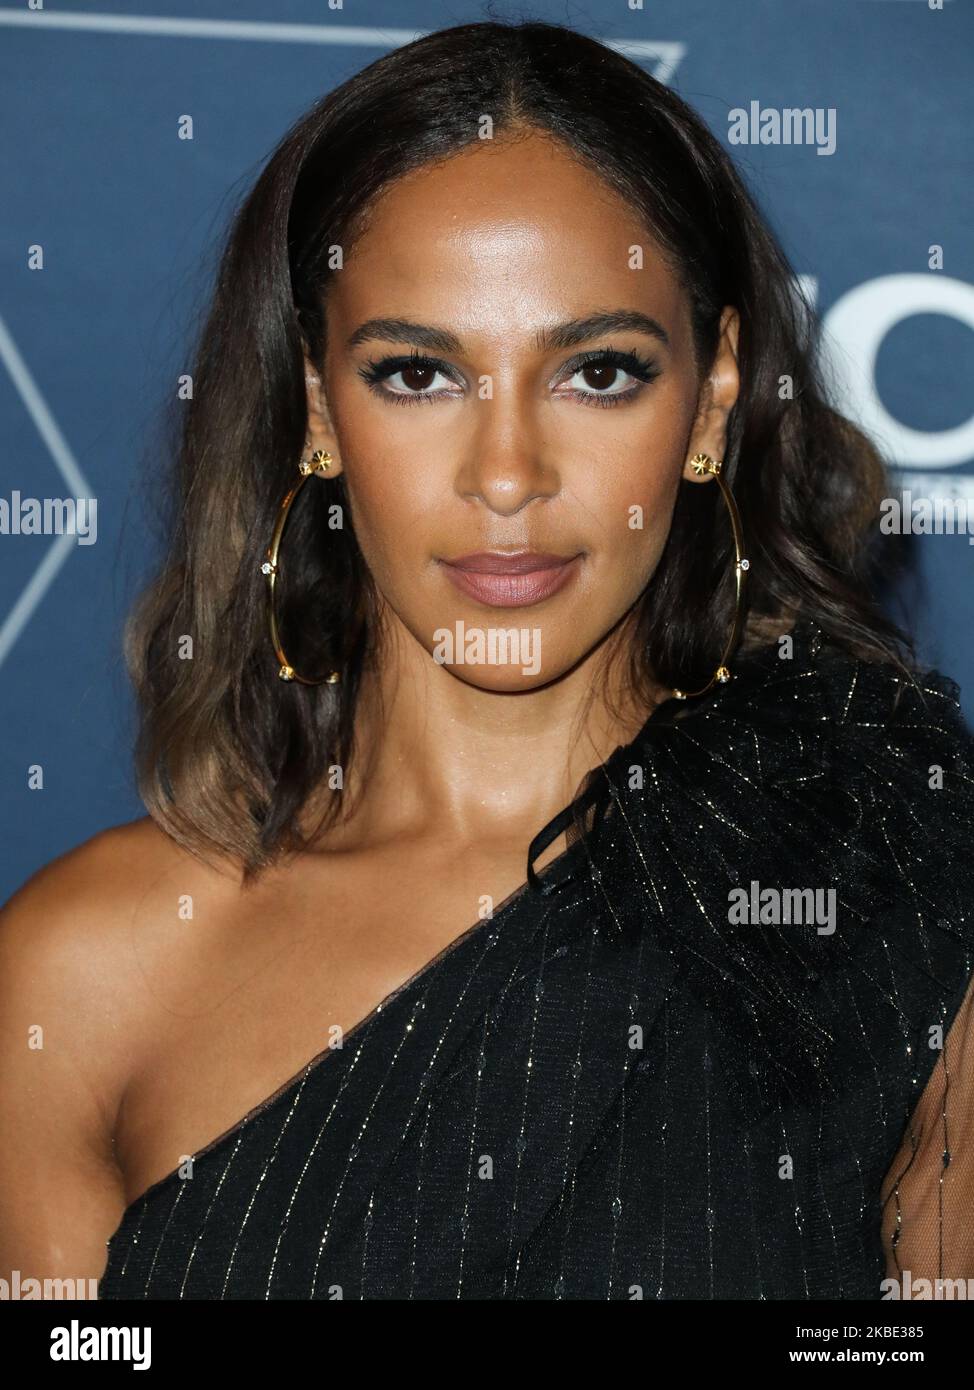 PASADENA, LOS ANGELES, CALIFORNIA, USA - JANUARY 07: Actress Megalyn Echikunwoke arrives at the FOX Winter TCA 2020 All-Star Party held at The Langham Huntington Hotel on January 7, 2020 in Pasadena, Los Angeles, California, United States. (Photo by Xavier Collin/Image Press Agency/NurPhoto) Stock Photo